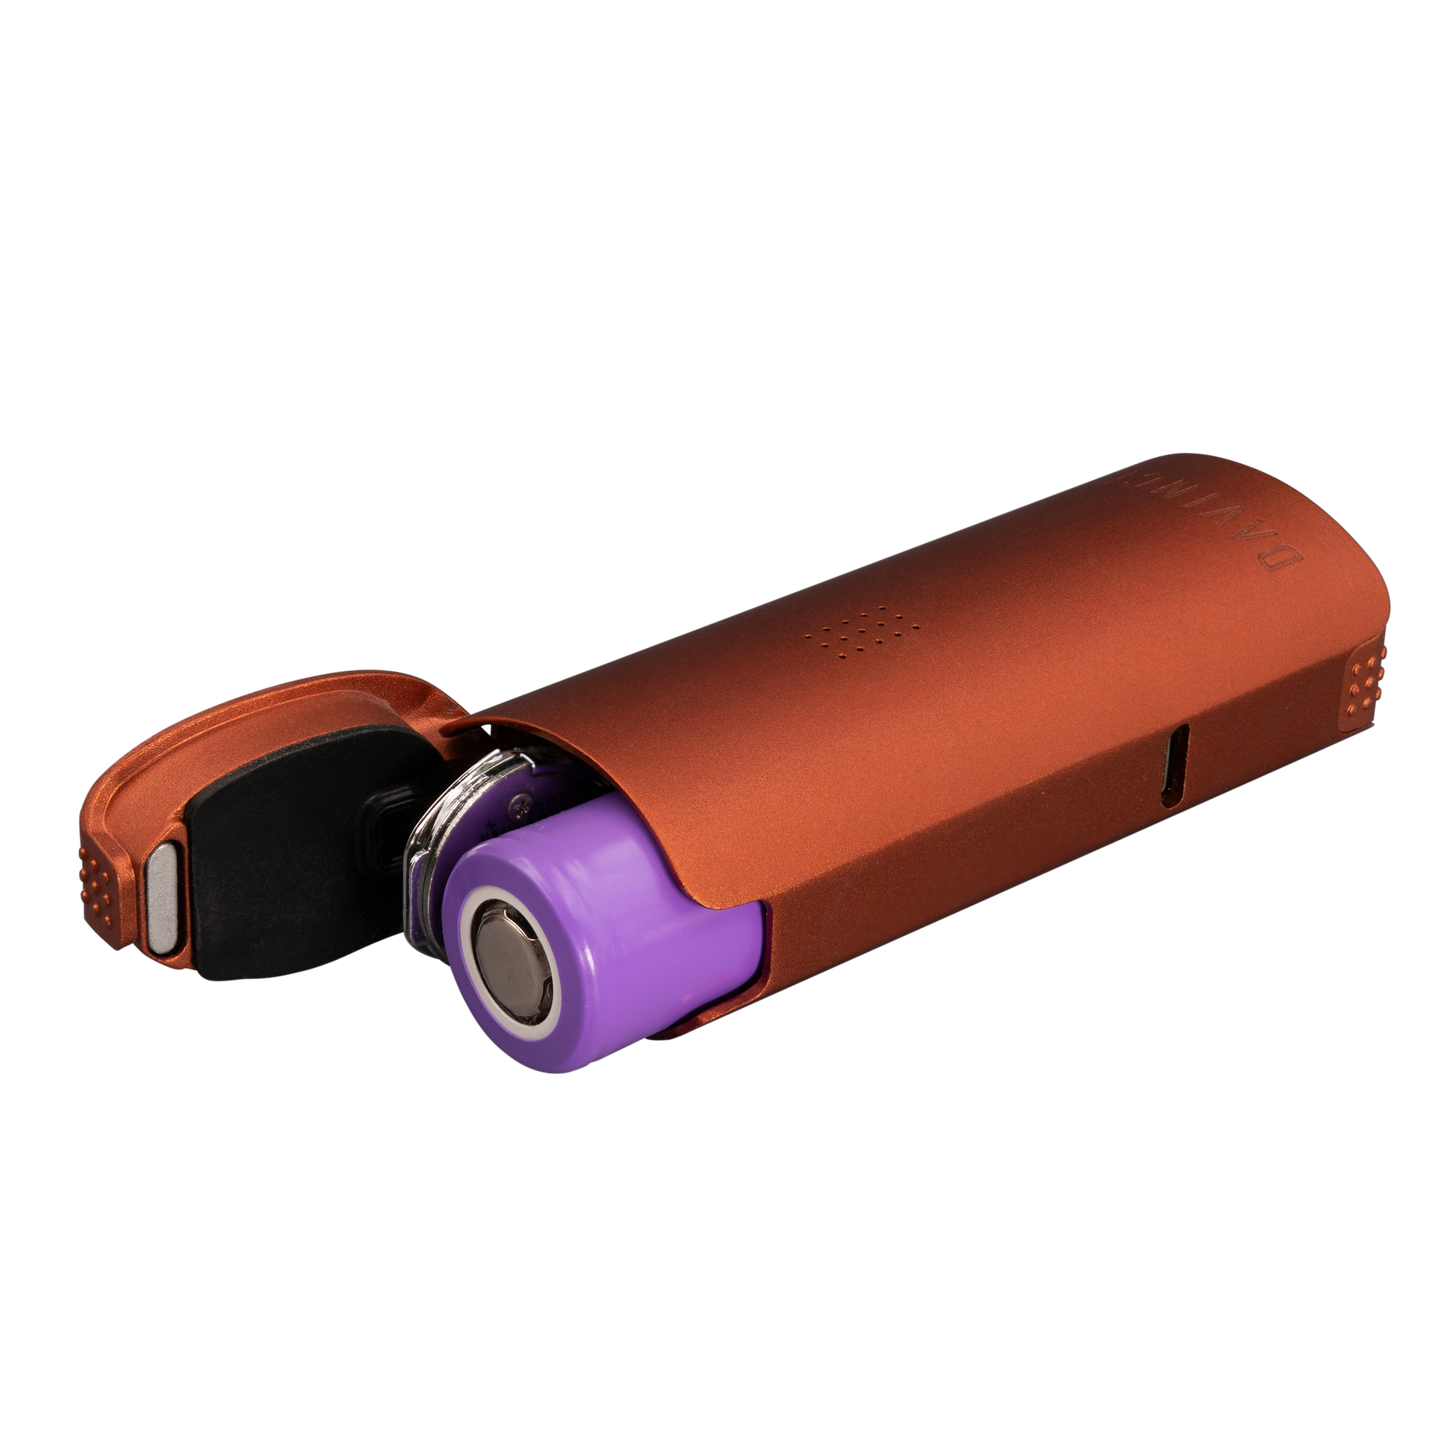 Davinci MIQRO Dry Herb Vaporizer - dry herbs and concentrates. Rust